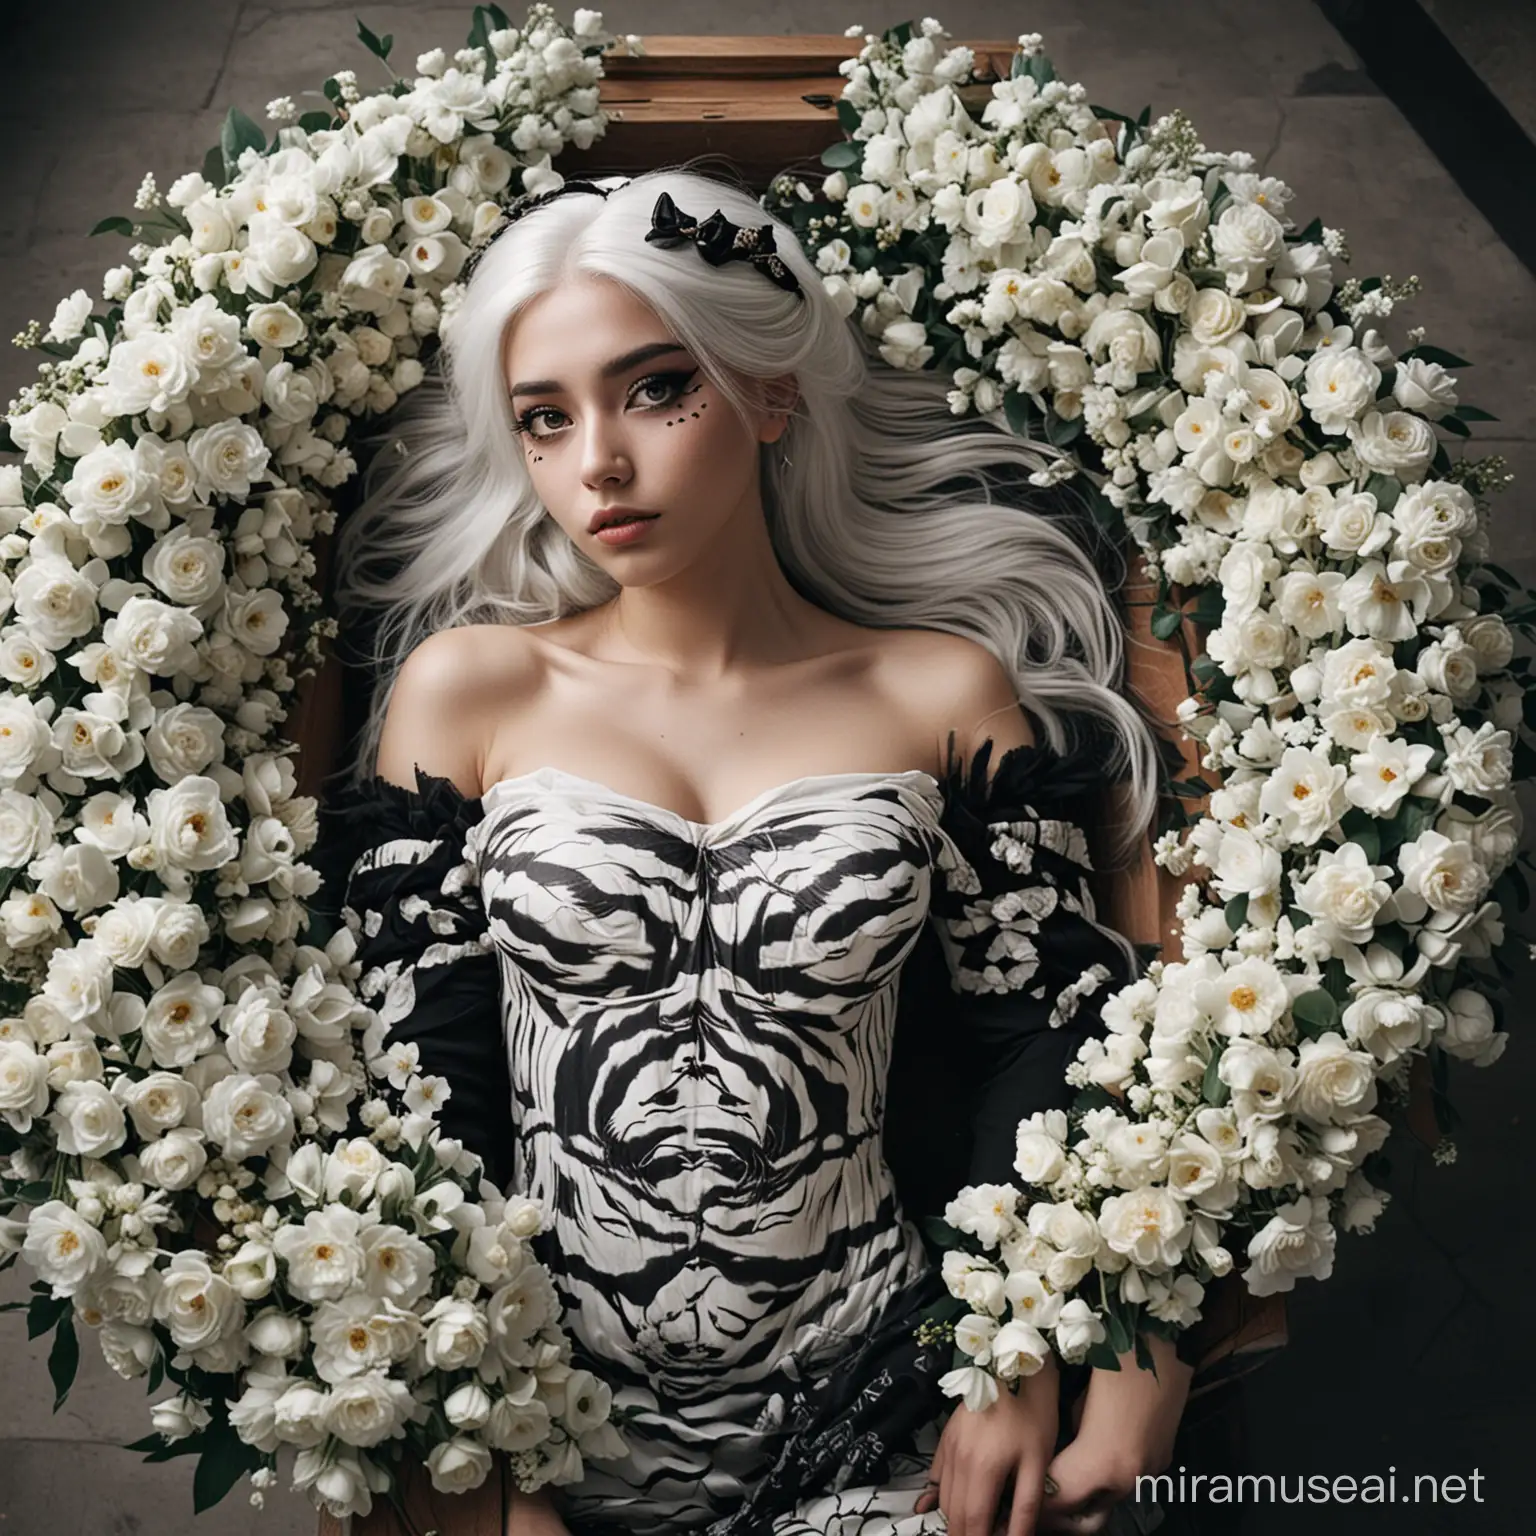 Mysterious Girl with White Hair in Elongated Coffin Surrounded by Flowers and Apples